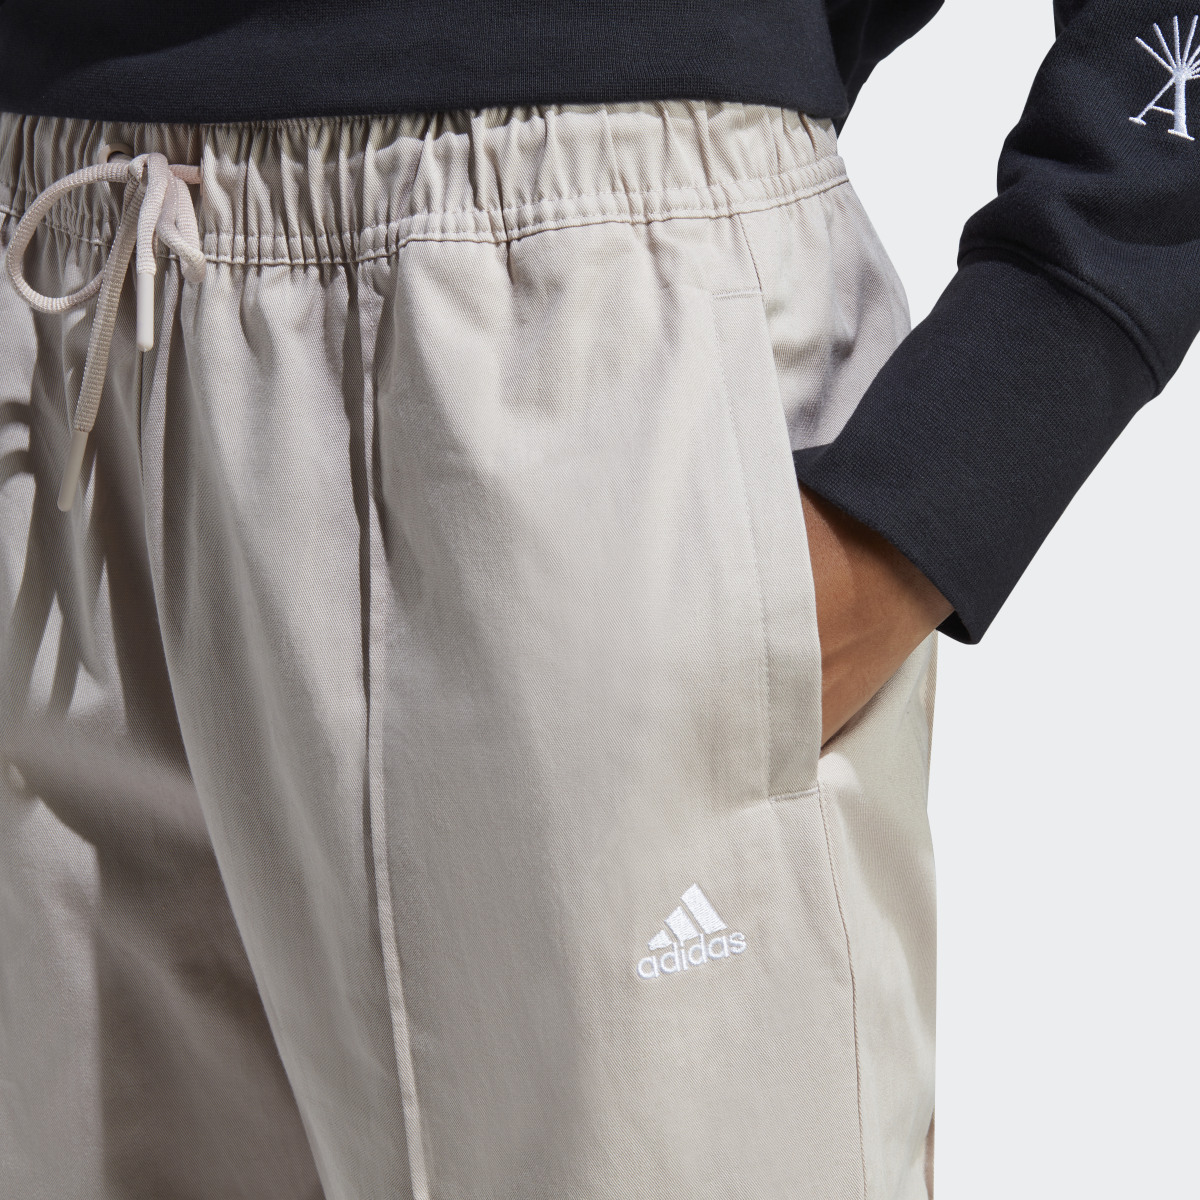 Adidas Loose Trousers with Healing Crystals-Inspired Graphics. 7